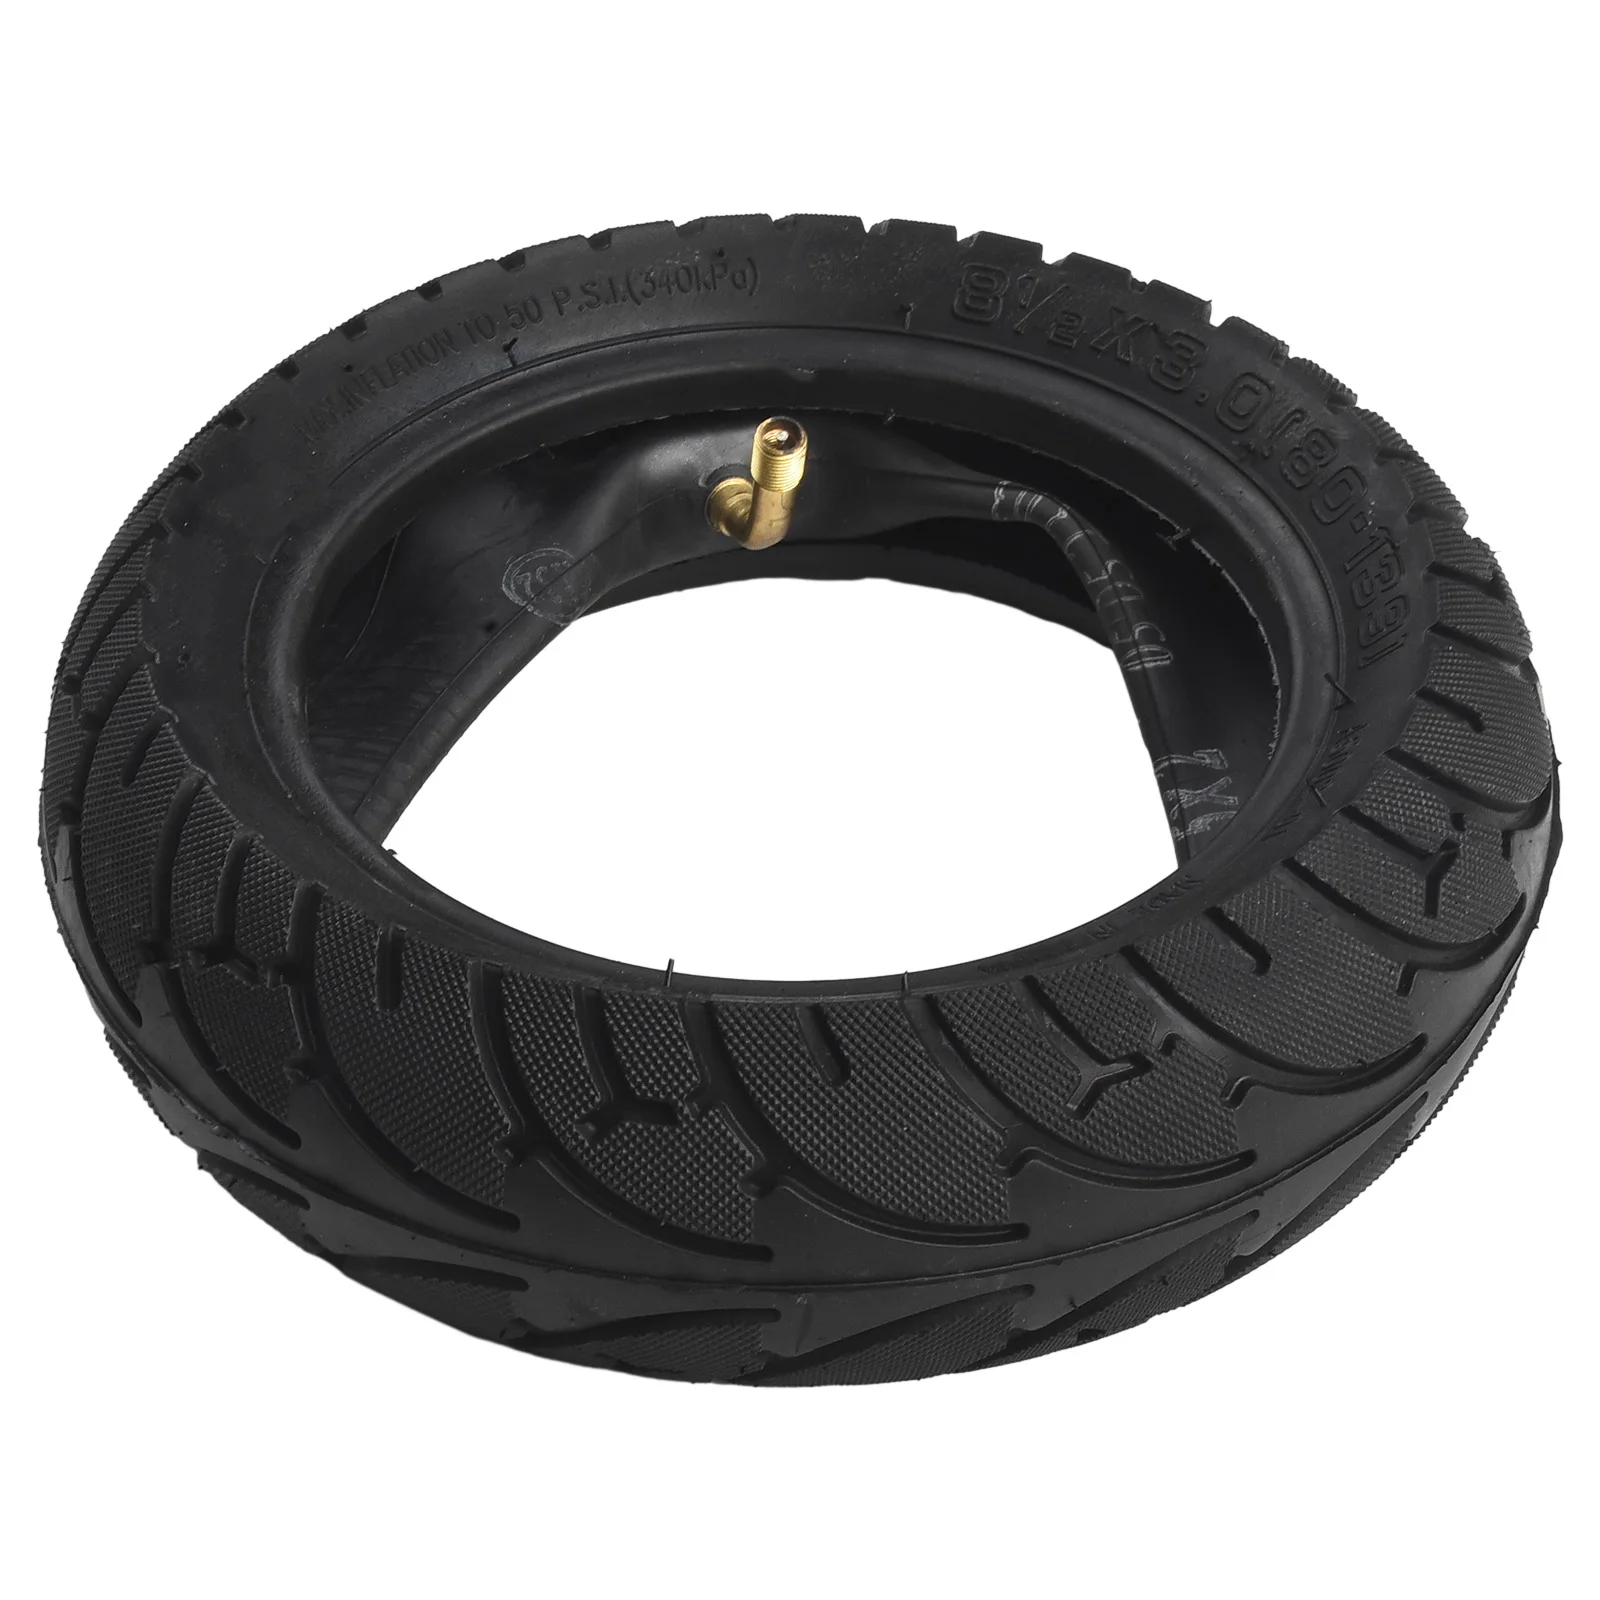 Tyre Set E-scooter Tire Outer Tires Replacement Wearproof 8 1/2x3.0(80-139) Electric Scooter Accessories Brand New